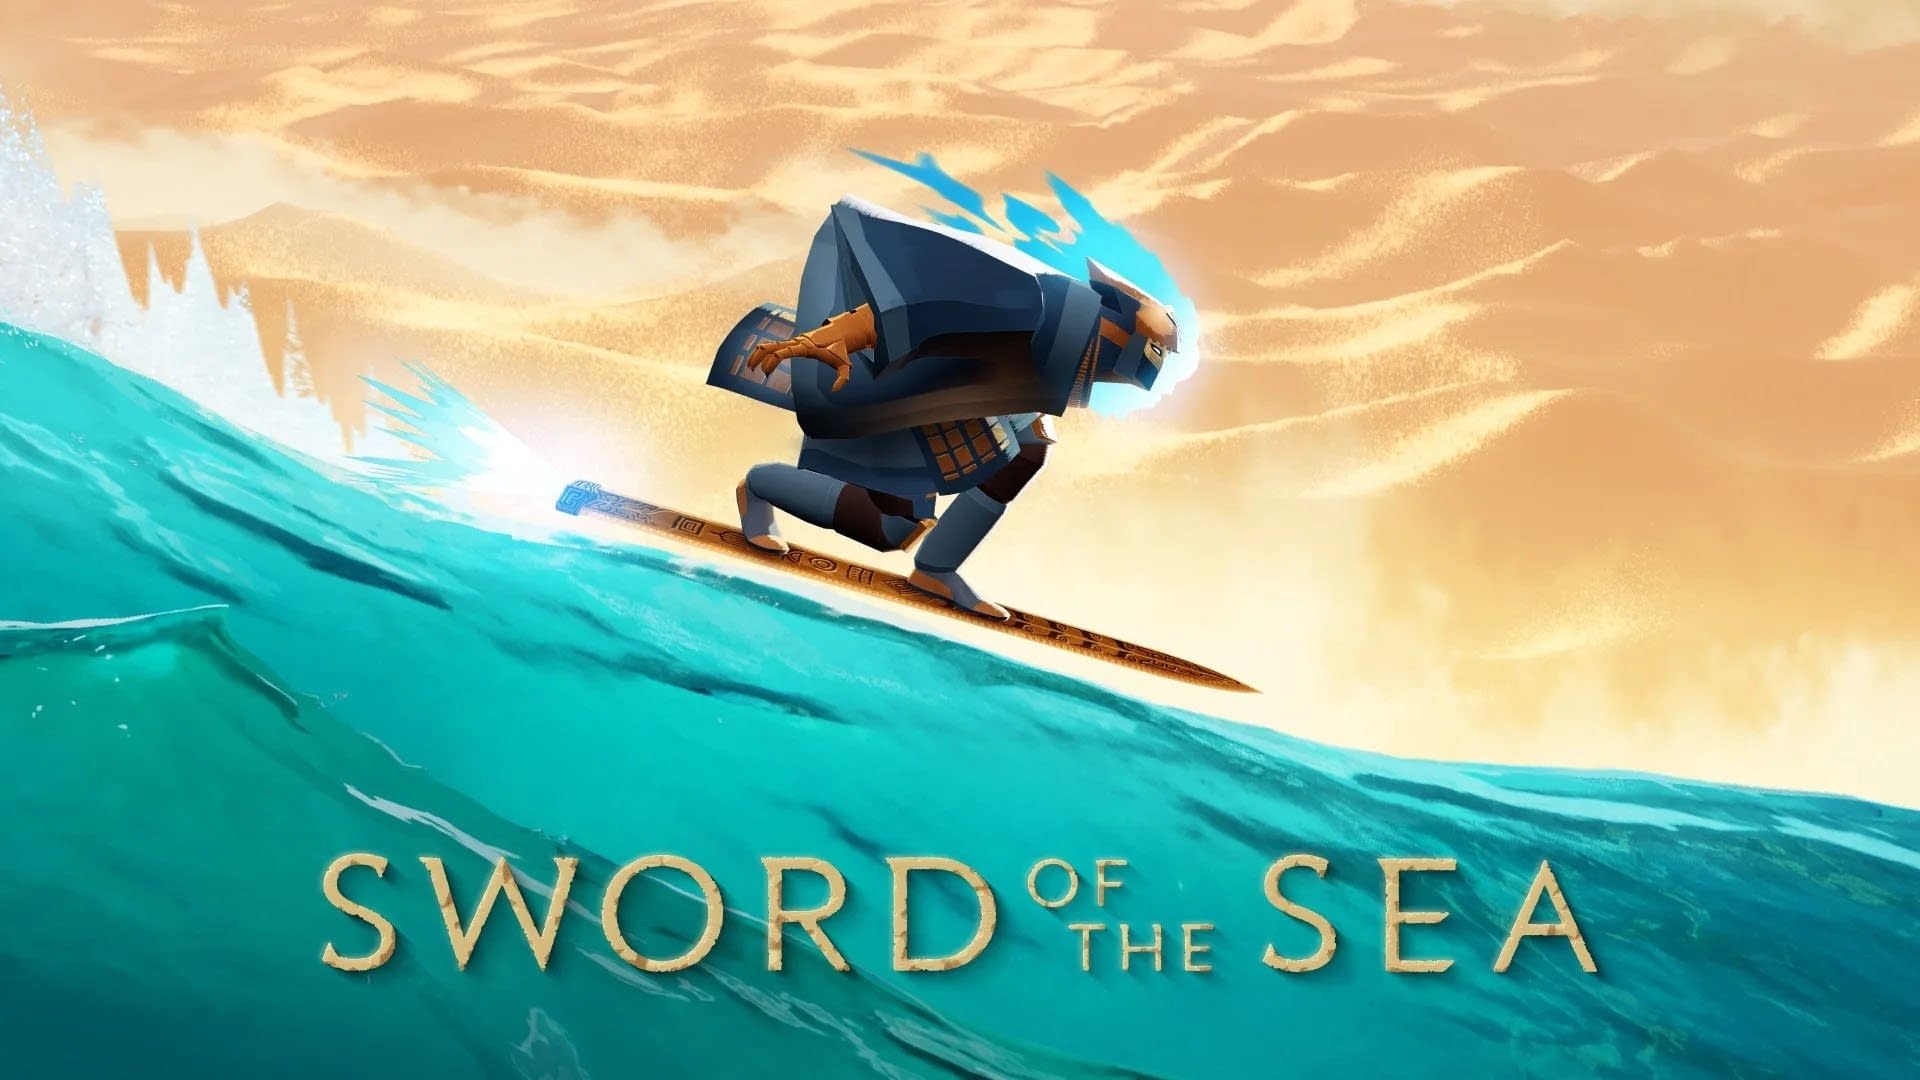 A new game comes from the Abzu developer: Sword of the Sea